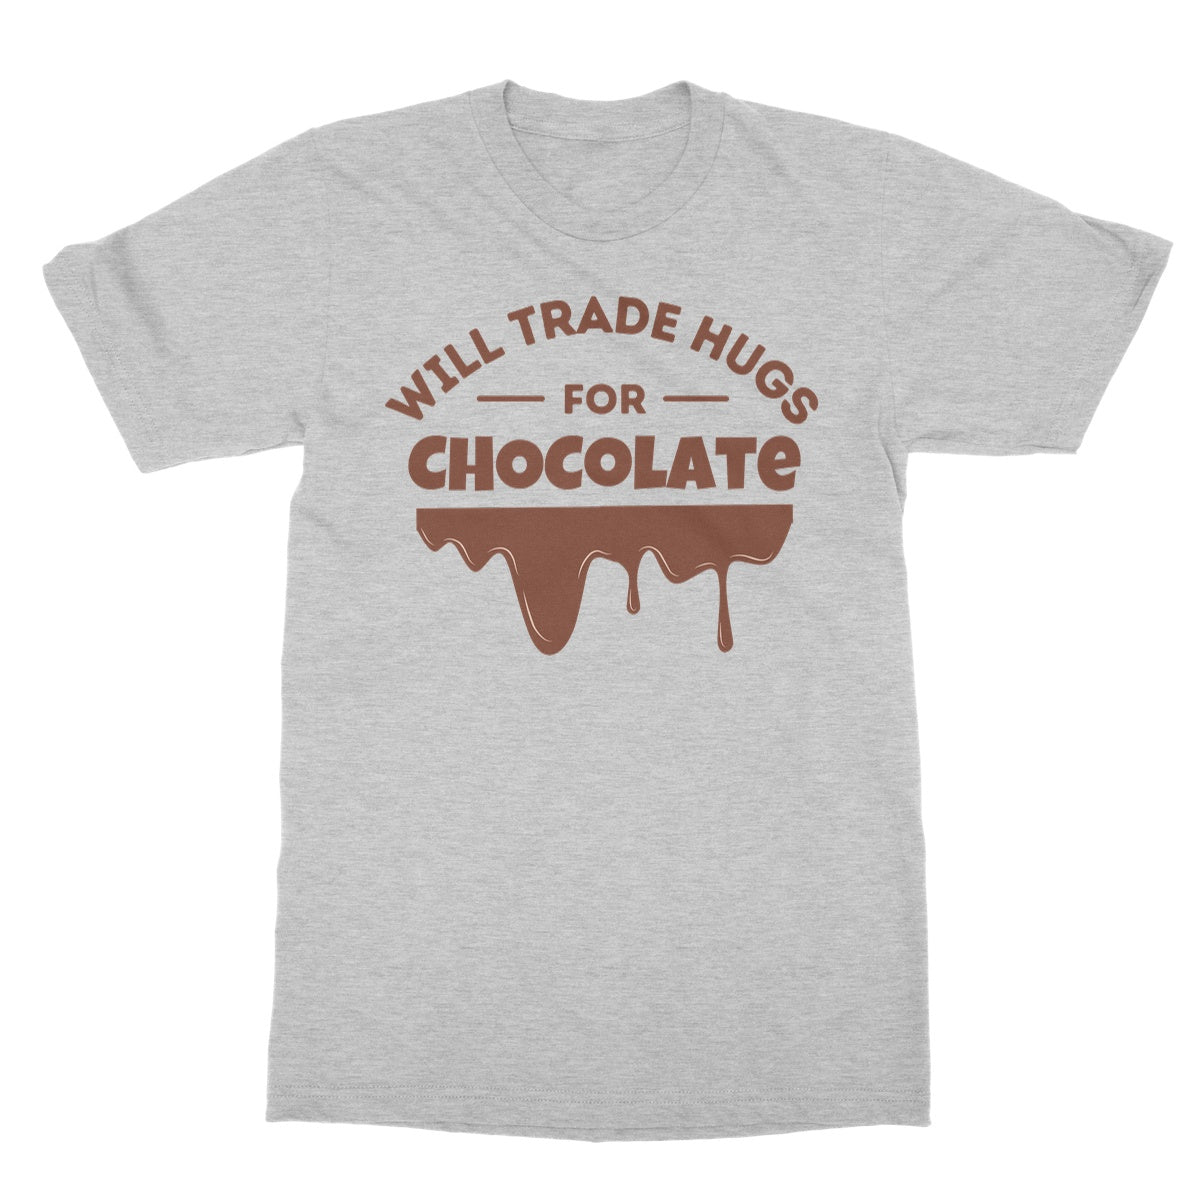 will trade hugs for chocolate t shirt grey